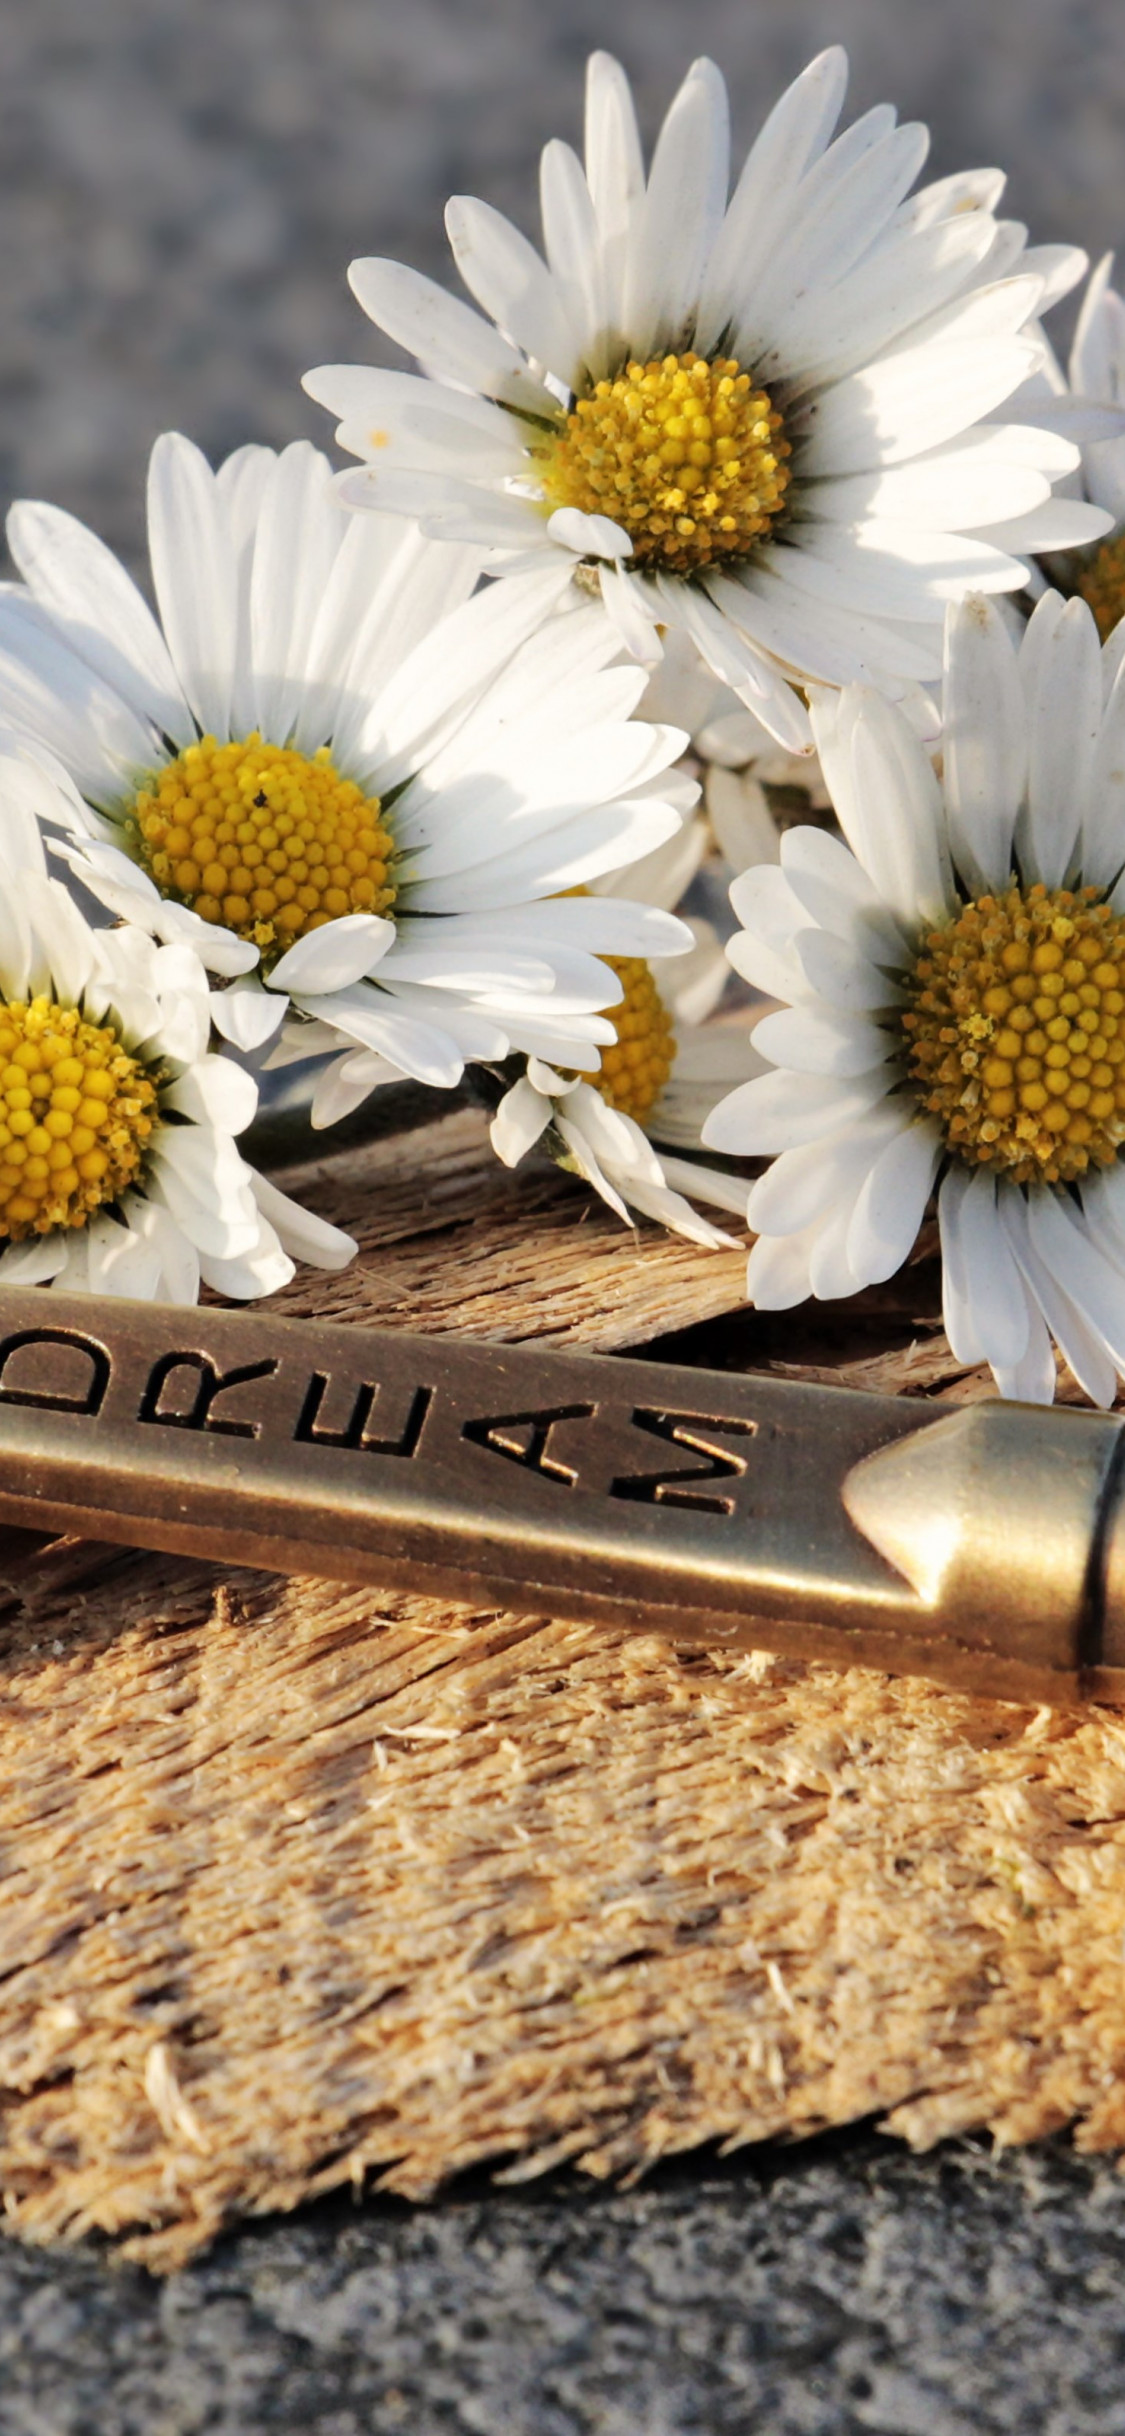 The dreams key and daisy flowers wallpaper 1125x2436